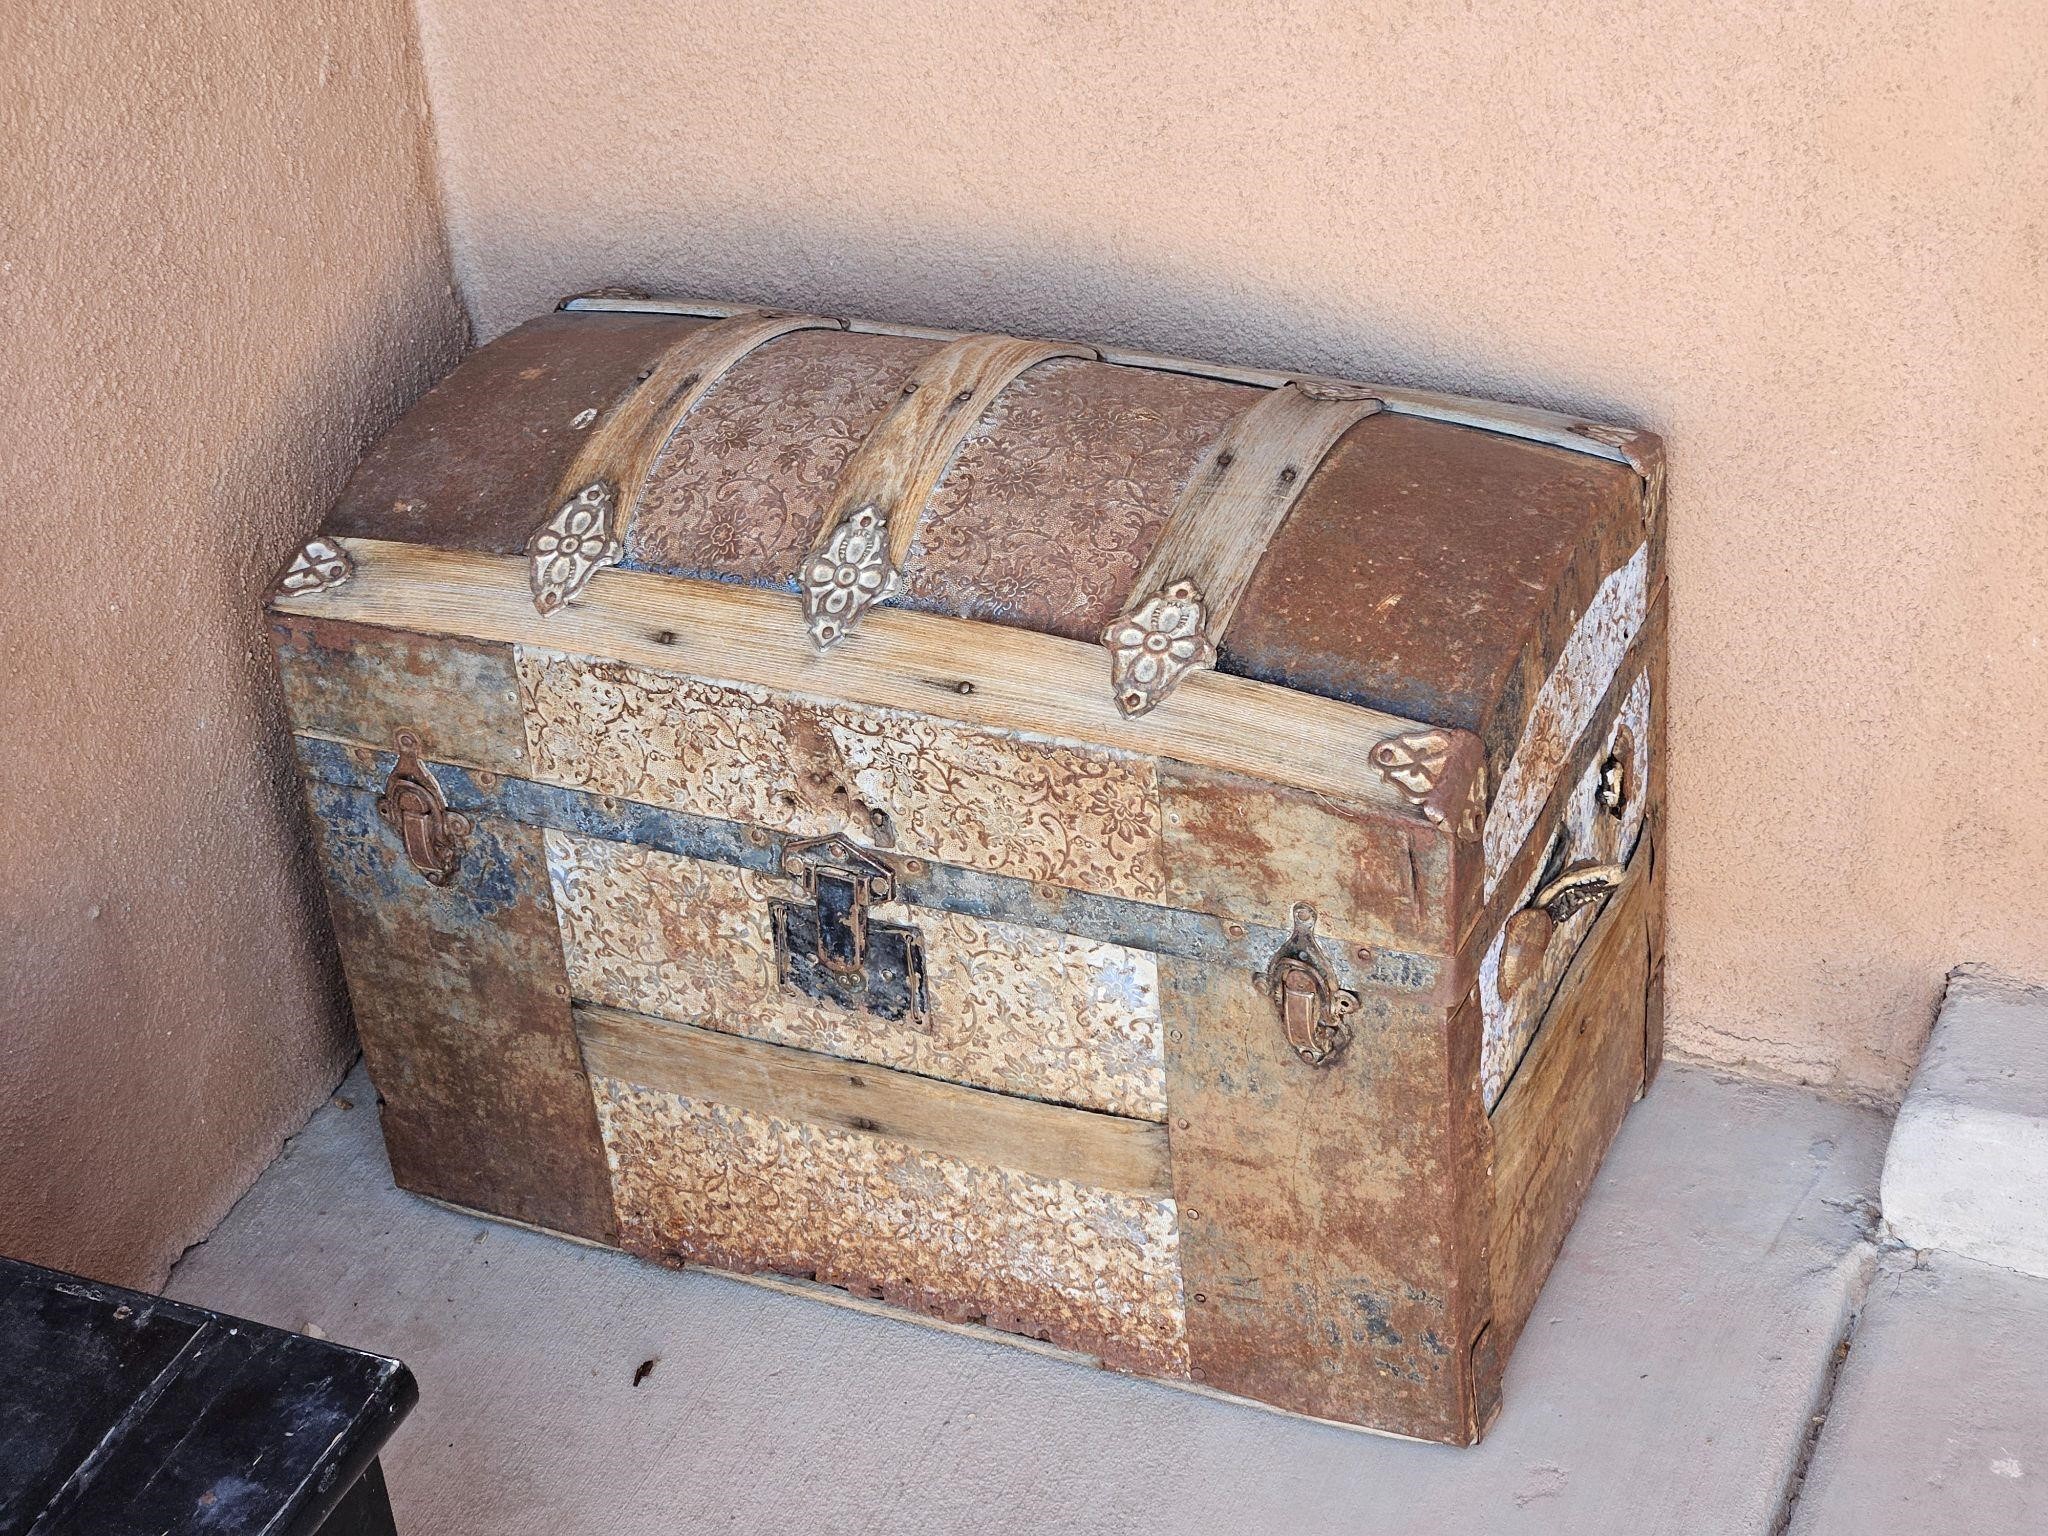 ANTIQUE TRUNK DATED 1880